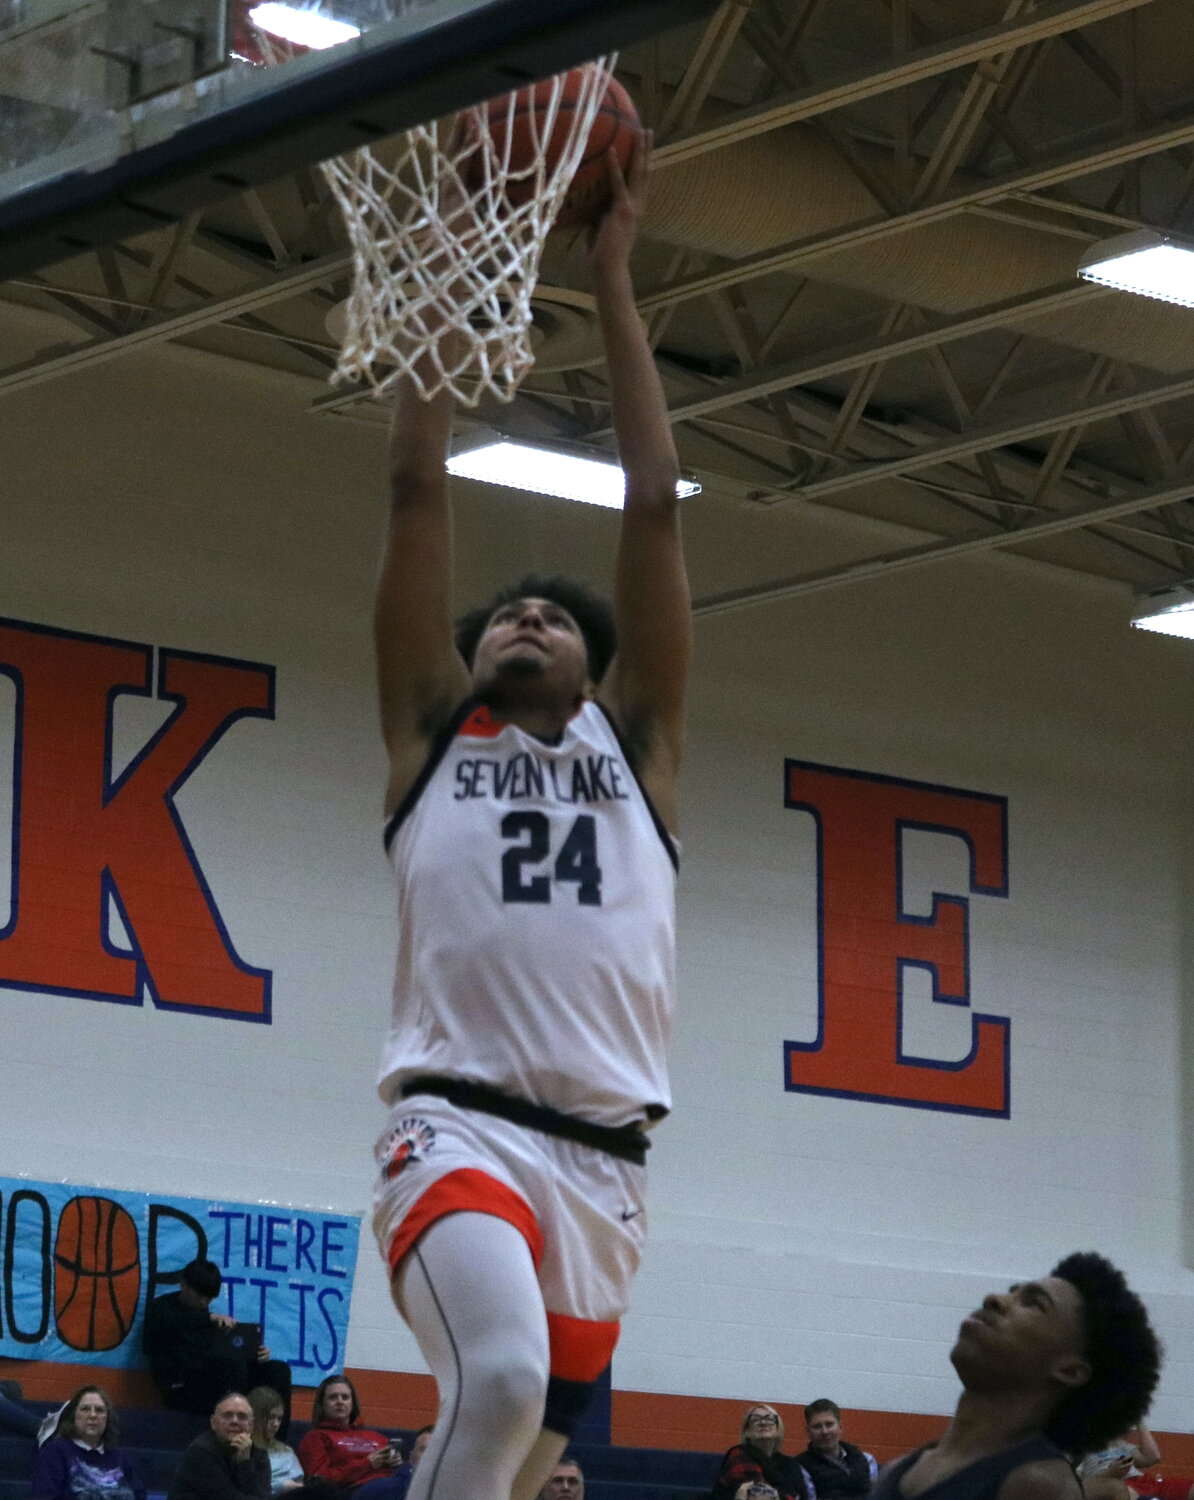 AJ Bates dunks the ball during Monday's game between Seven Lakes and Pearland Dawson at the Seven Lakes gym.